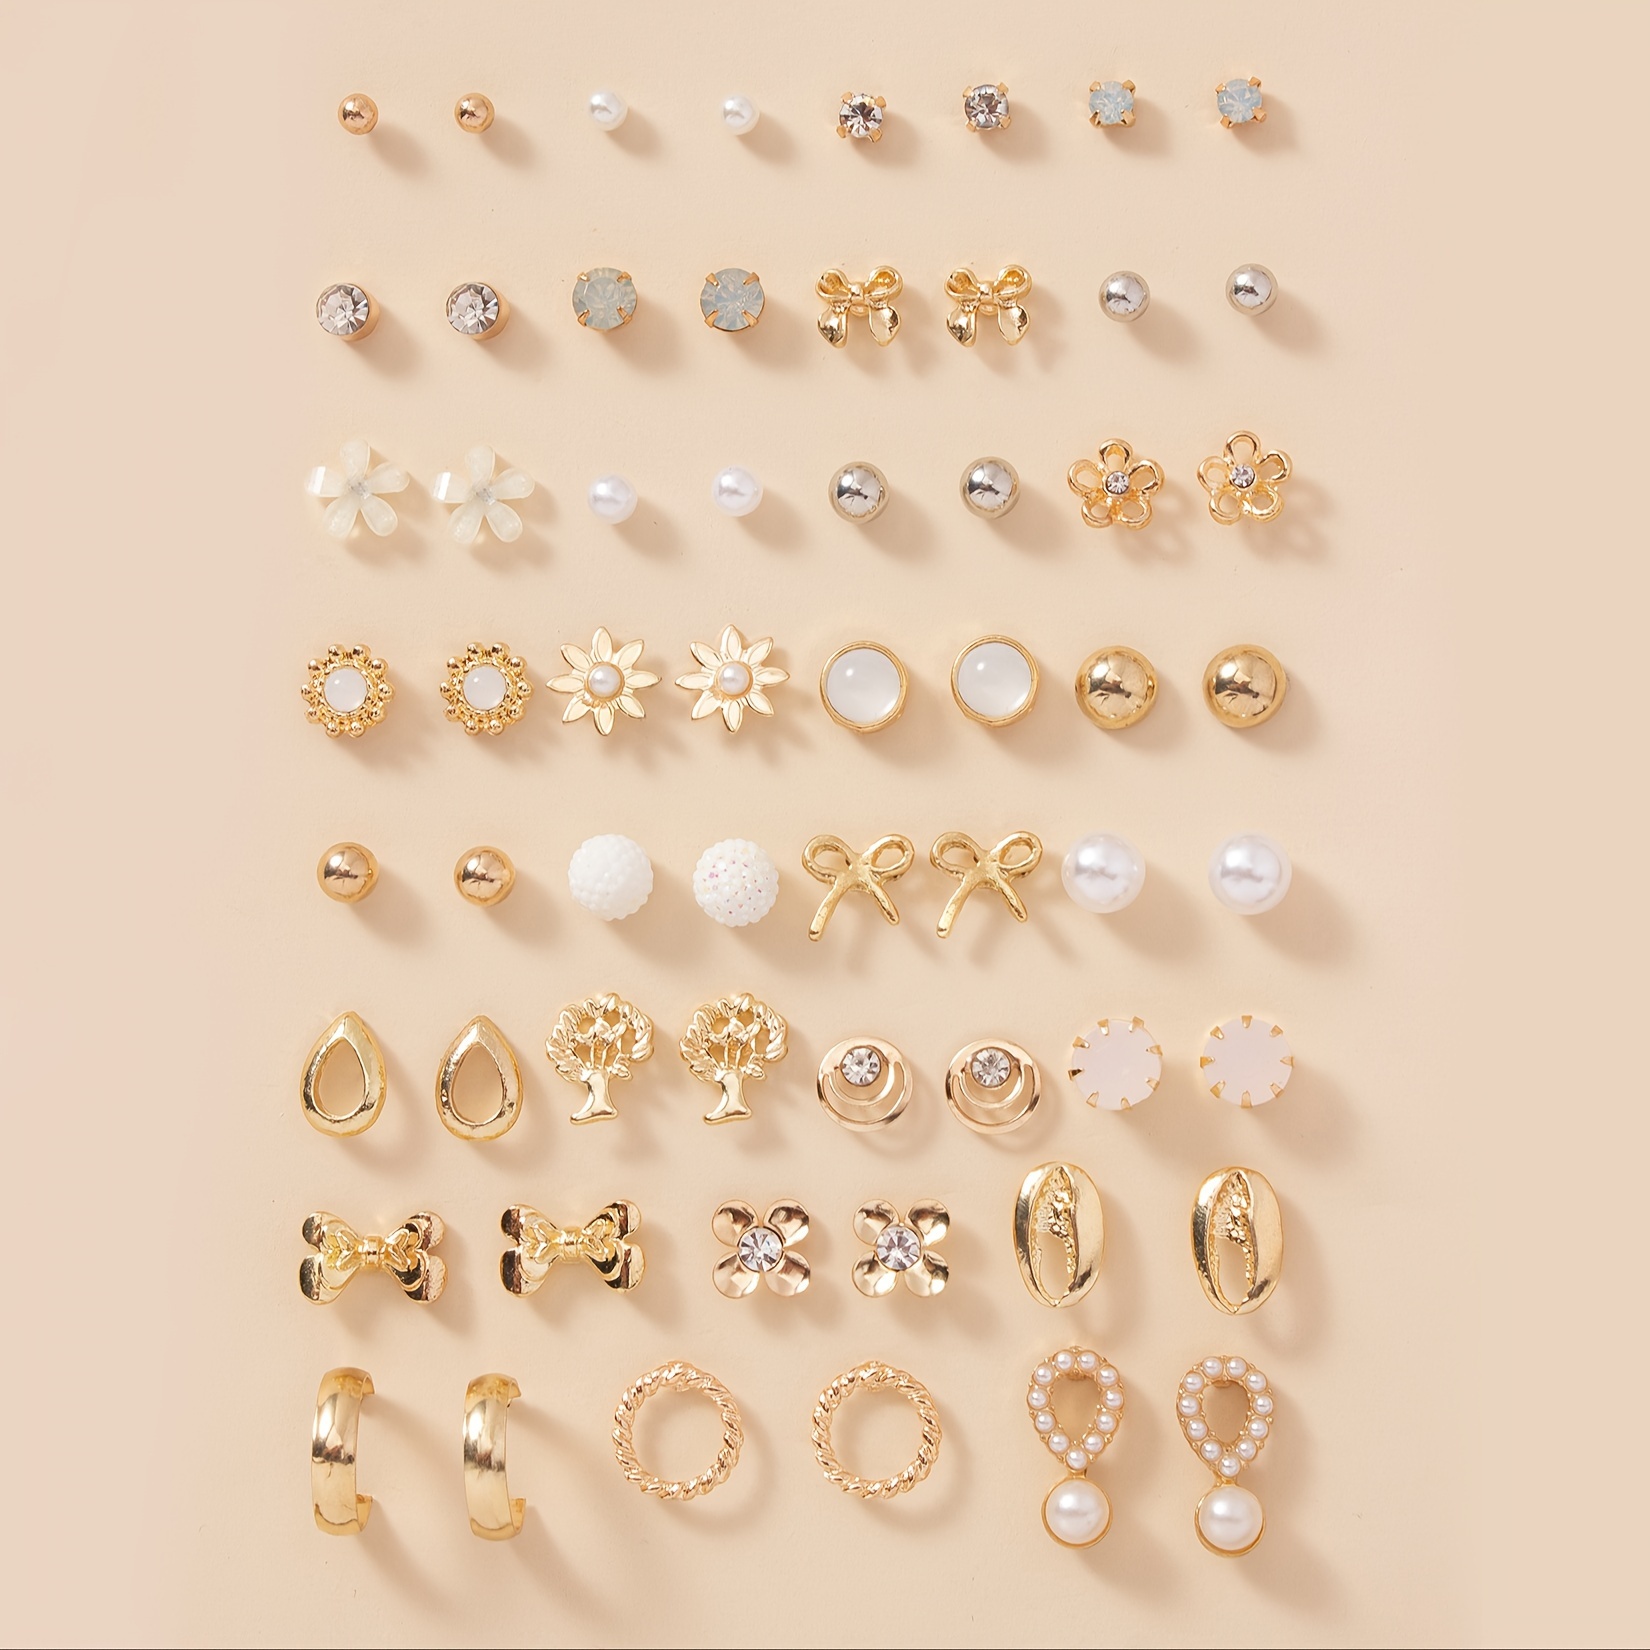 

30 Pairs Set Of Tiny Stud Earrings Zinc Alloy Jewelry Rhinestones Inlaid Different Shapes Elegant Leisure Style Ear Jewelry Set